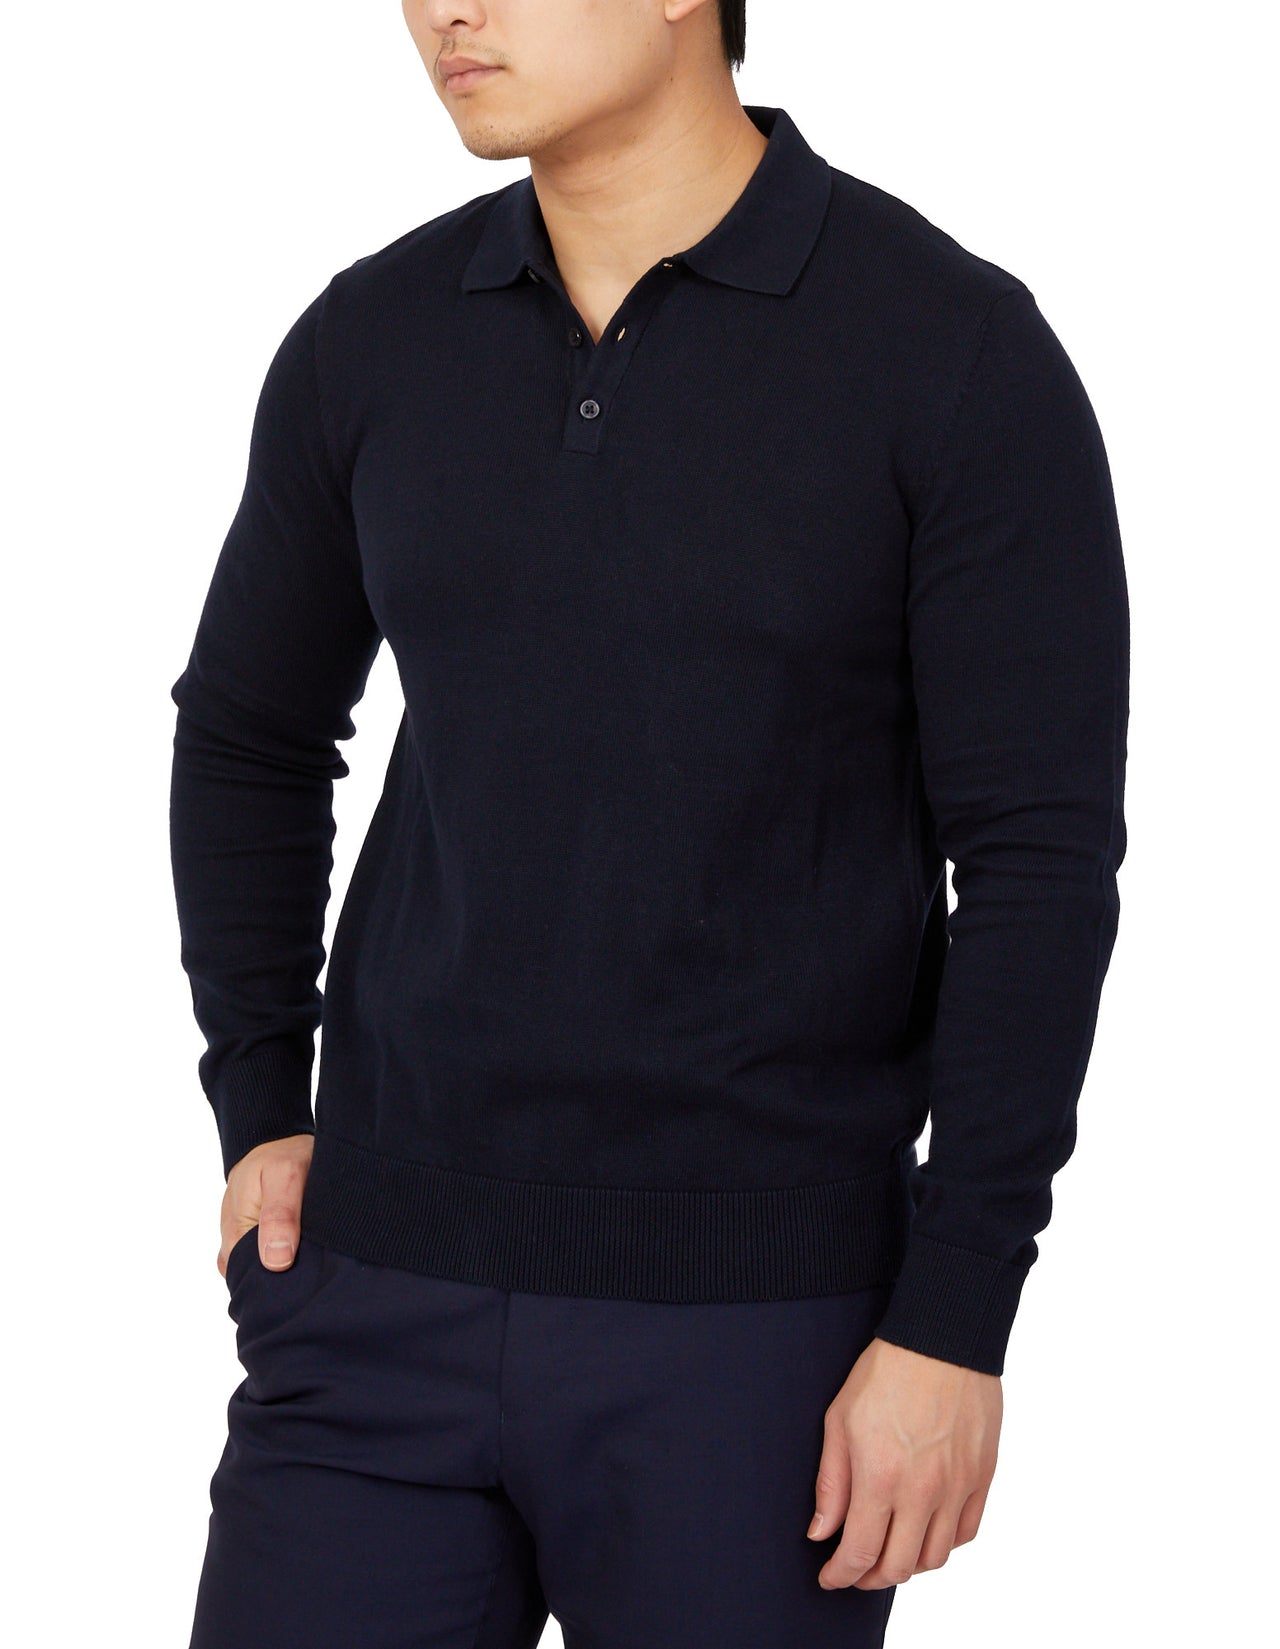 BEAUCAIRE Cotton Knitted Long Sleeve Polo NAVY